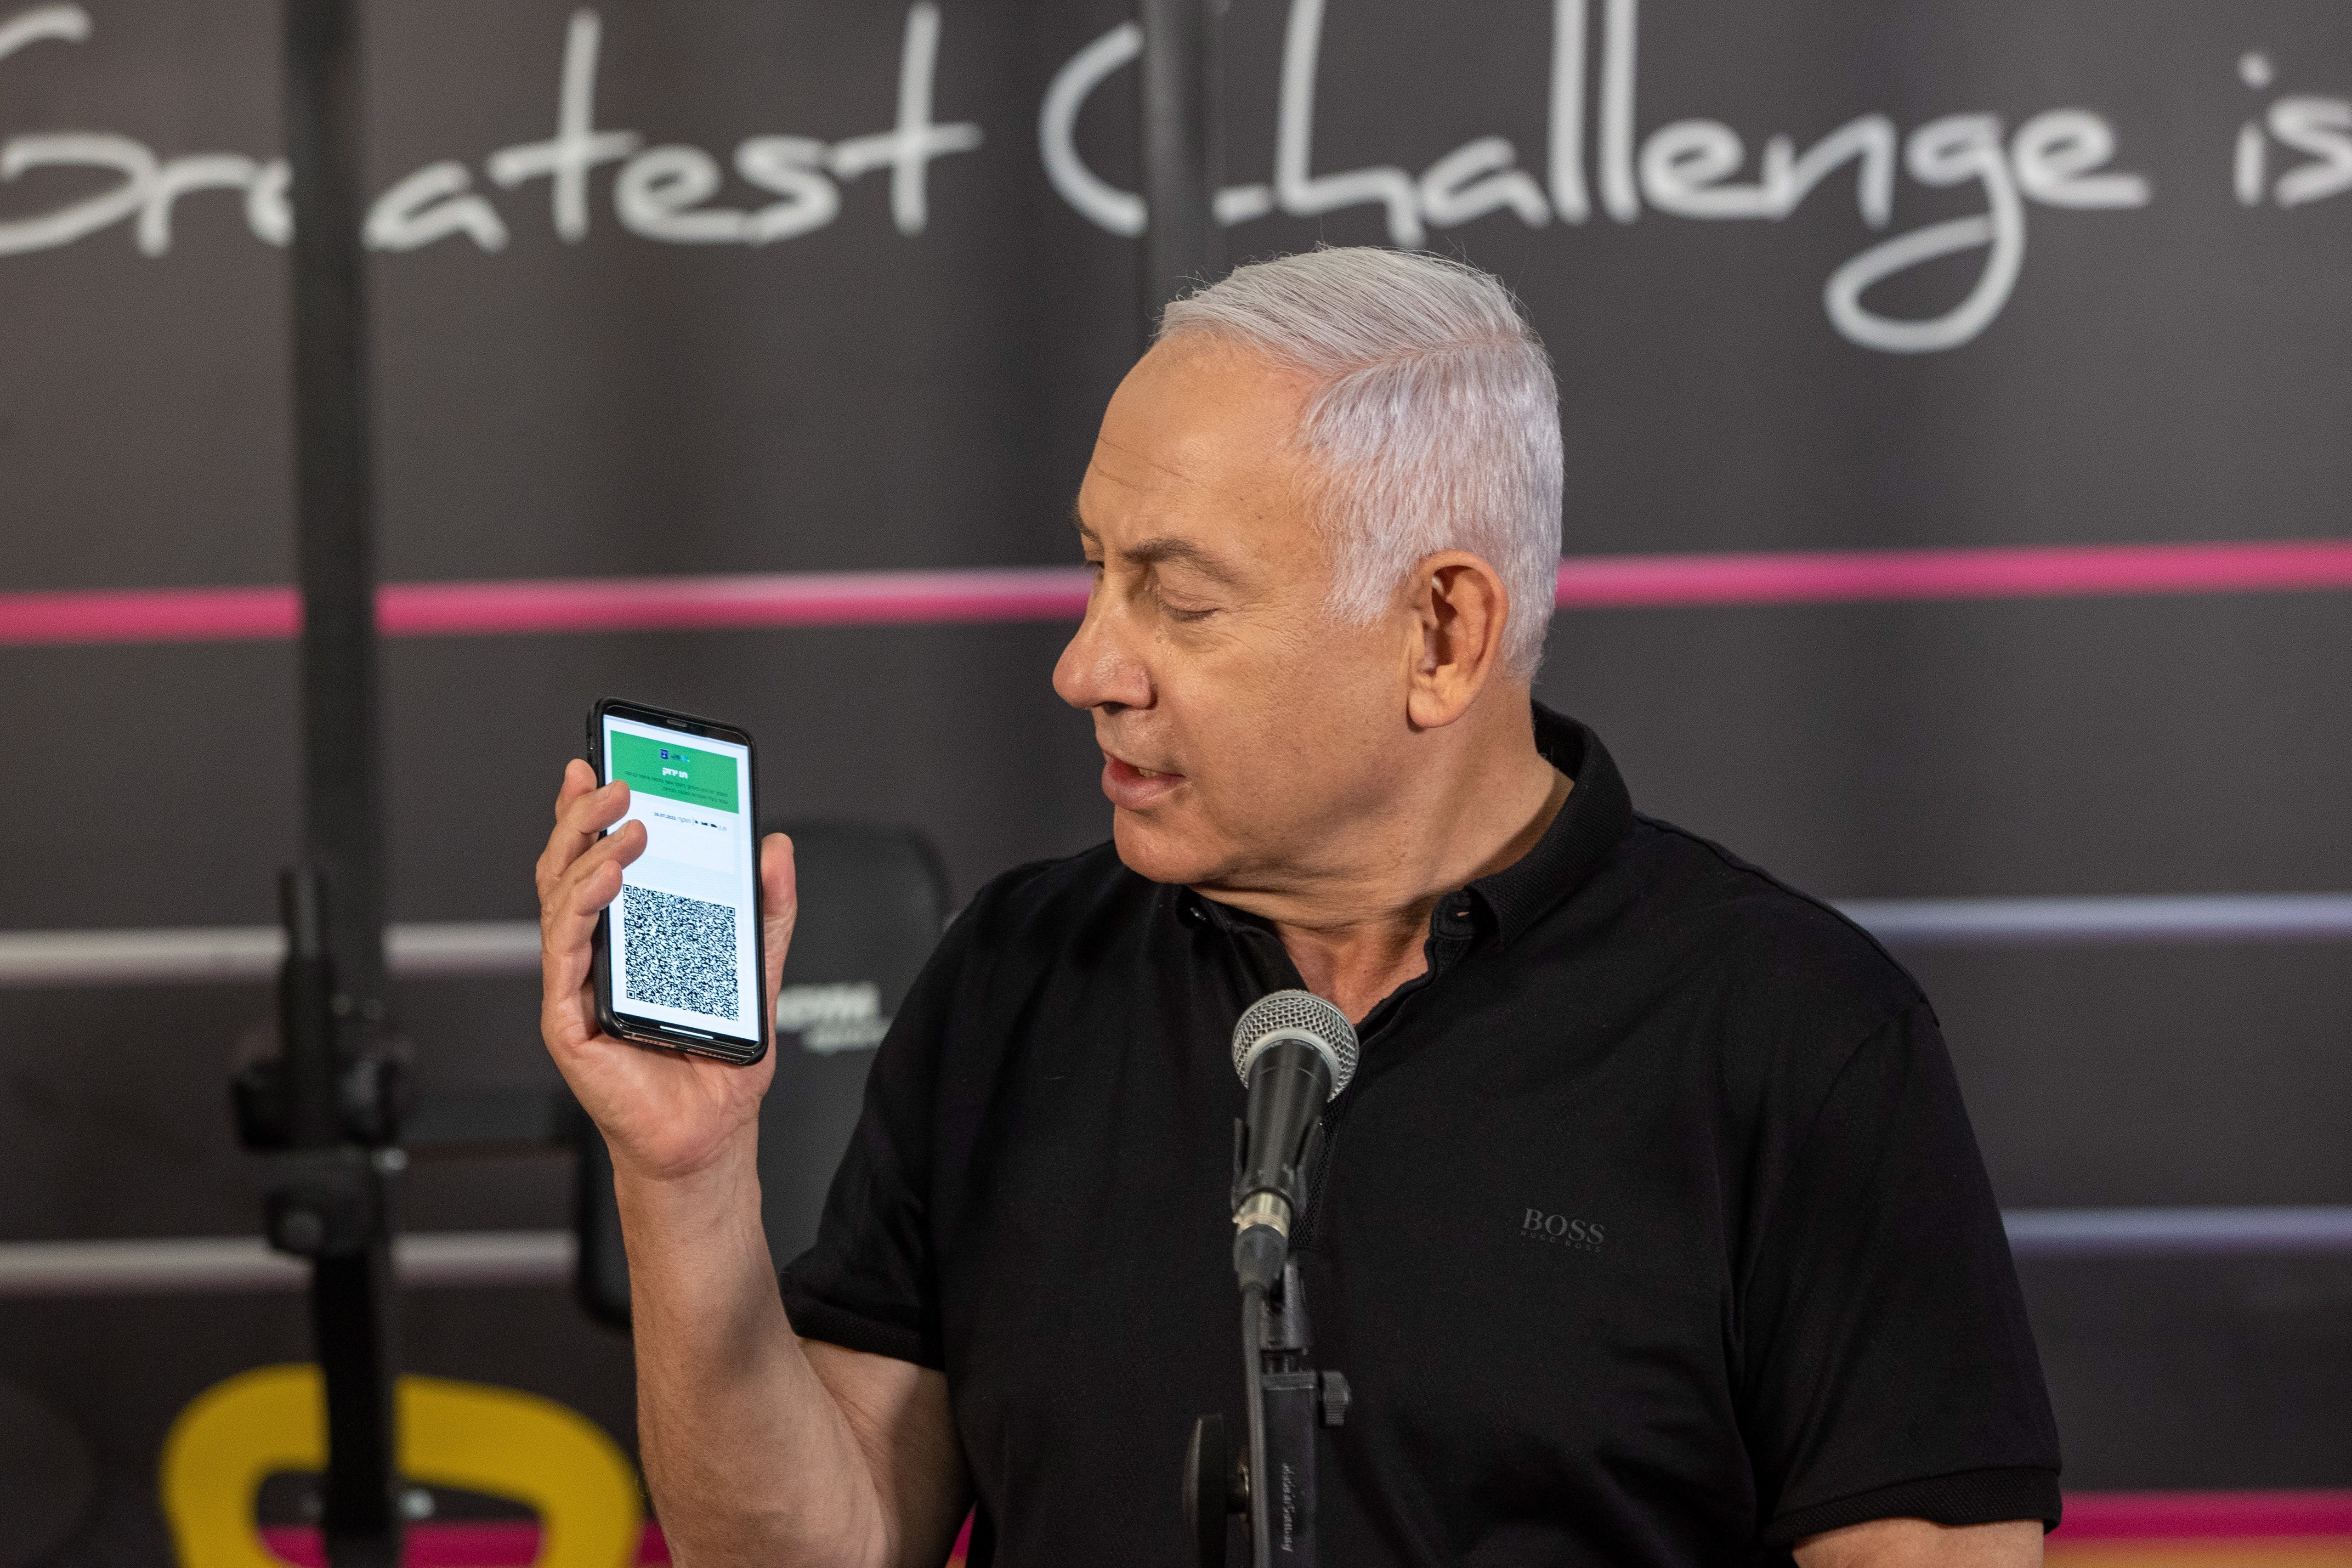 Israeli Prime Minister Benjamin Netanyahu holds a phone as he speaks during a visit to a fitness gym ahead of the reopening of gyms, in Petah Tikva, Israel, Feb. 20, 2021.  (EPA Photo)